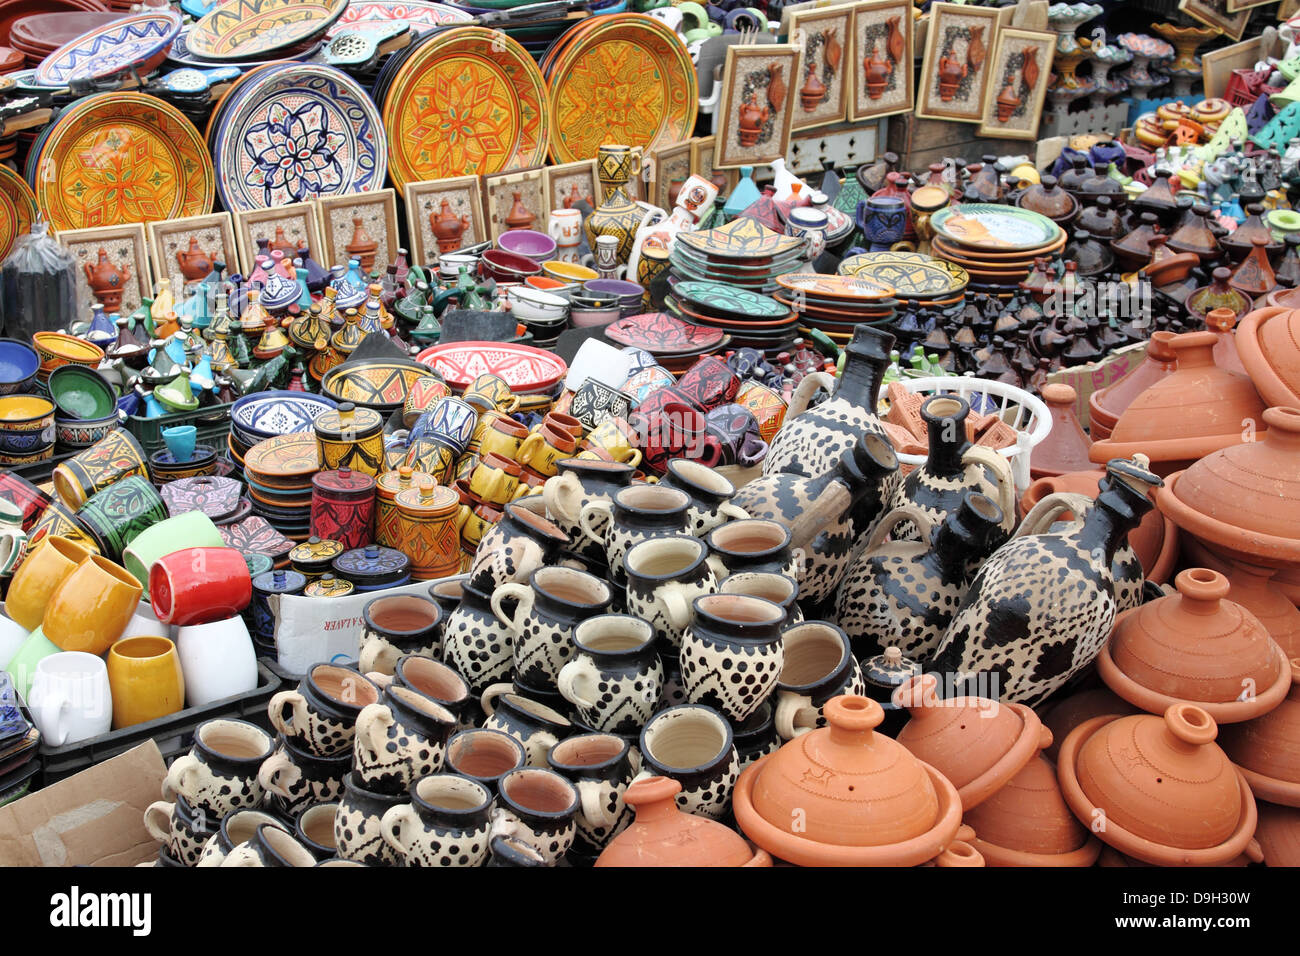 Traditional moroccan pottery for sale in a market stall Stock Photo